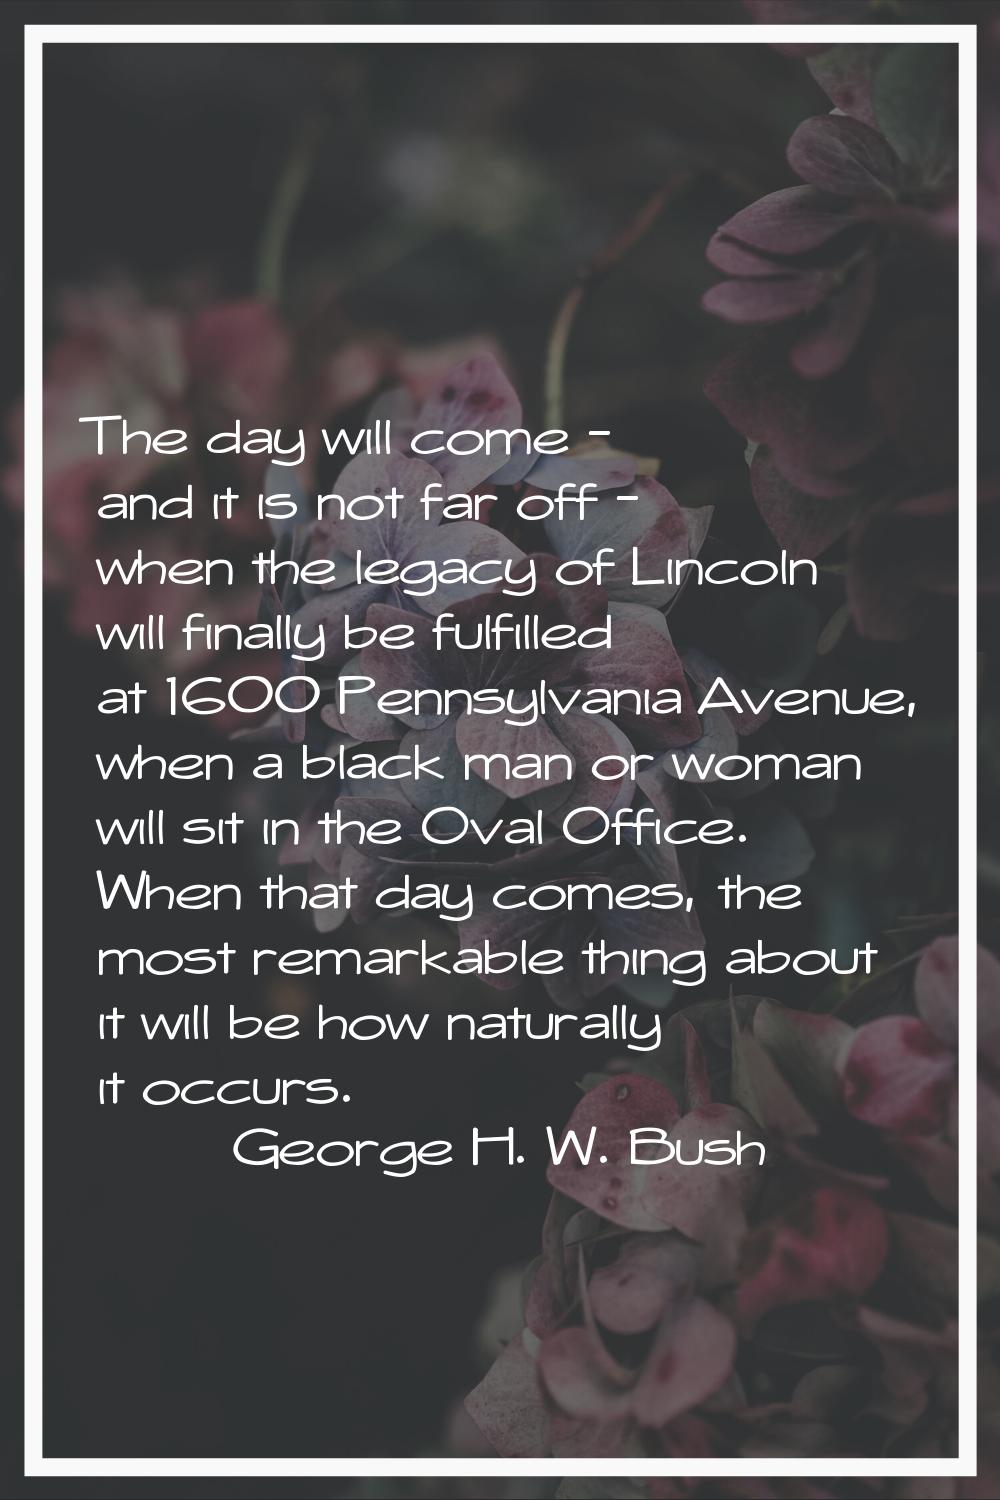 The day will come - and it is not far off - when the legacy of Lincoln will finally be fulfilled at